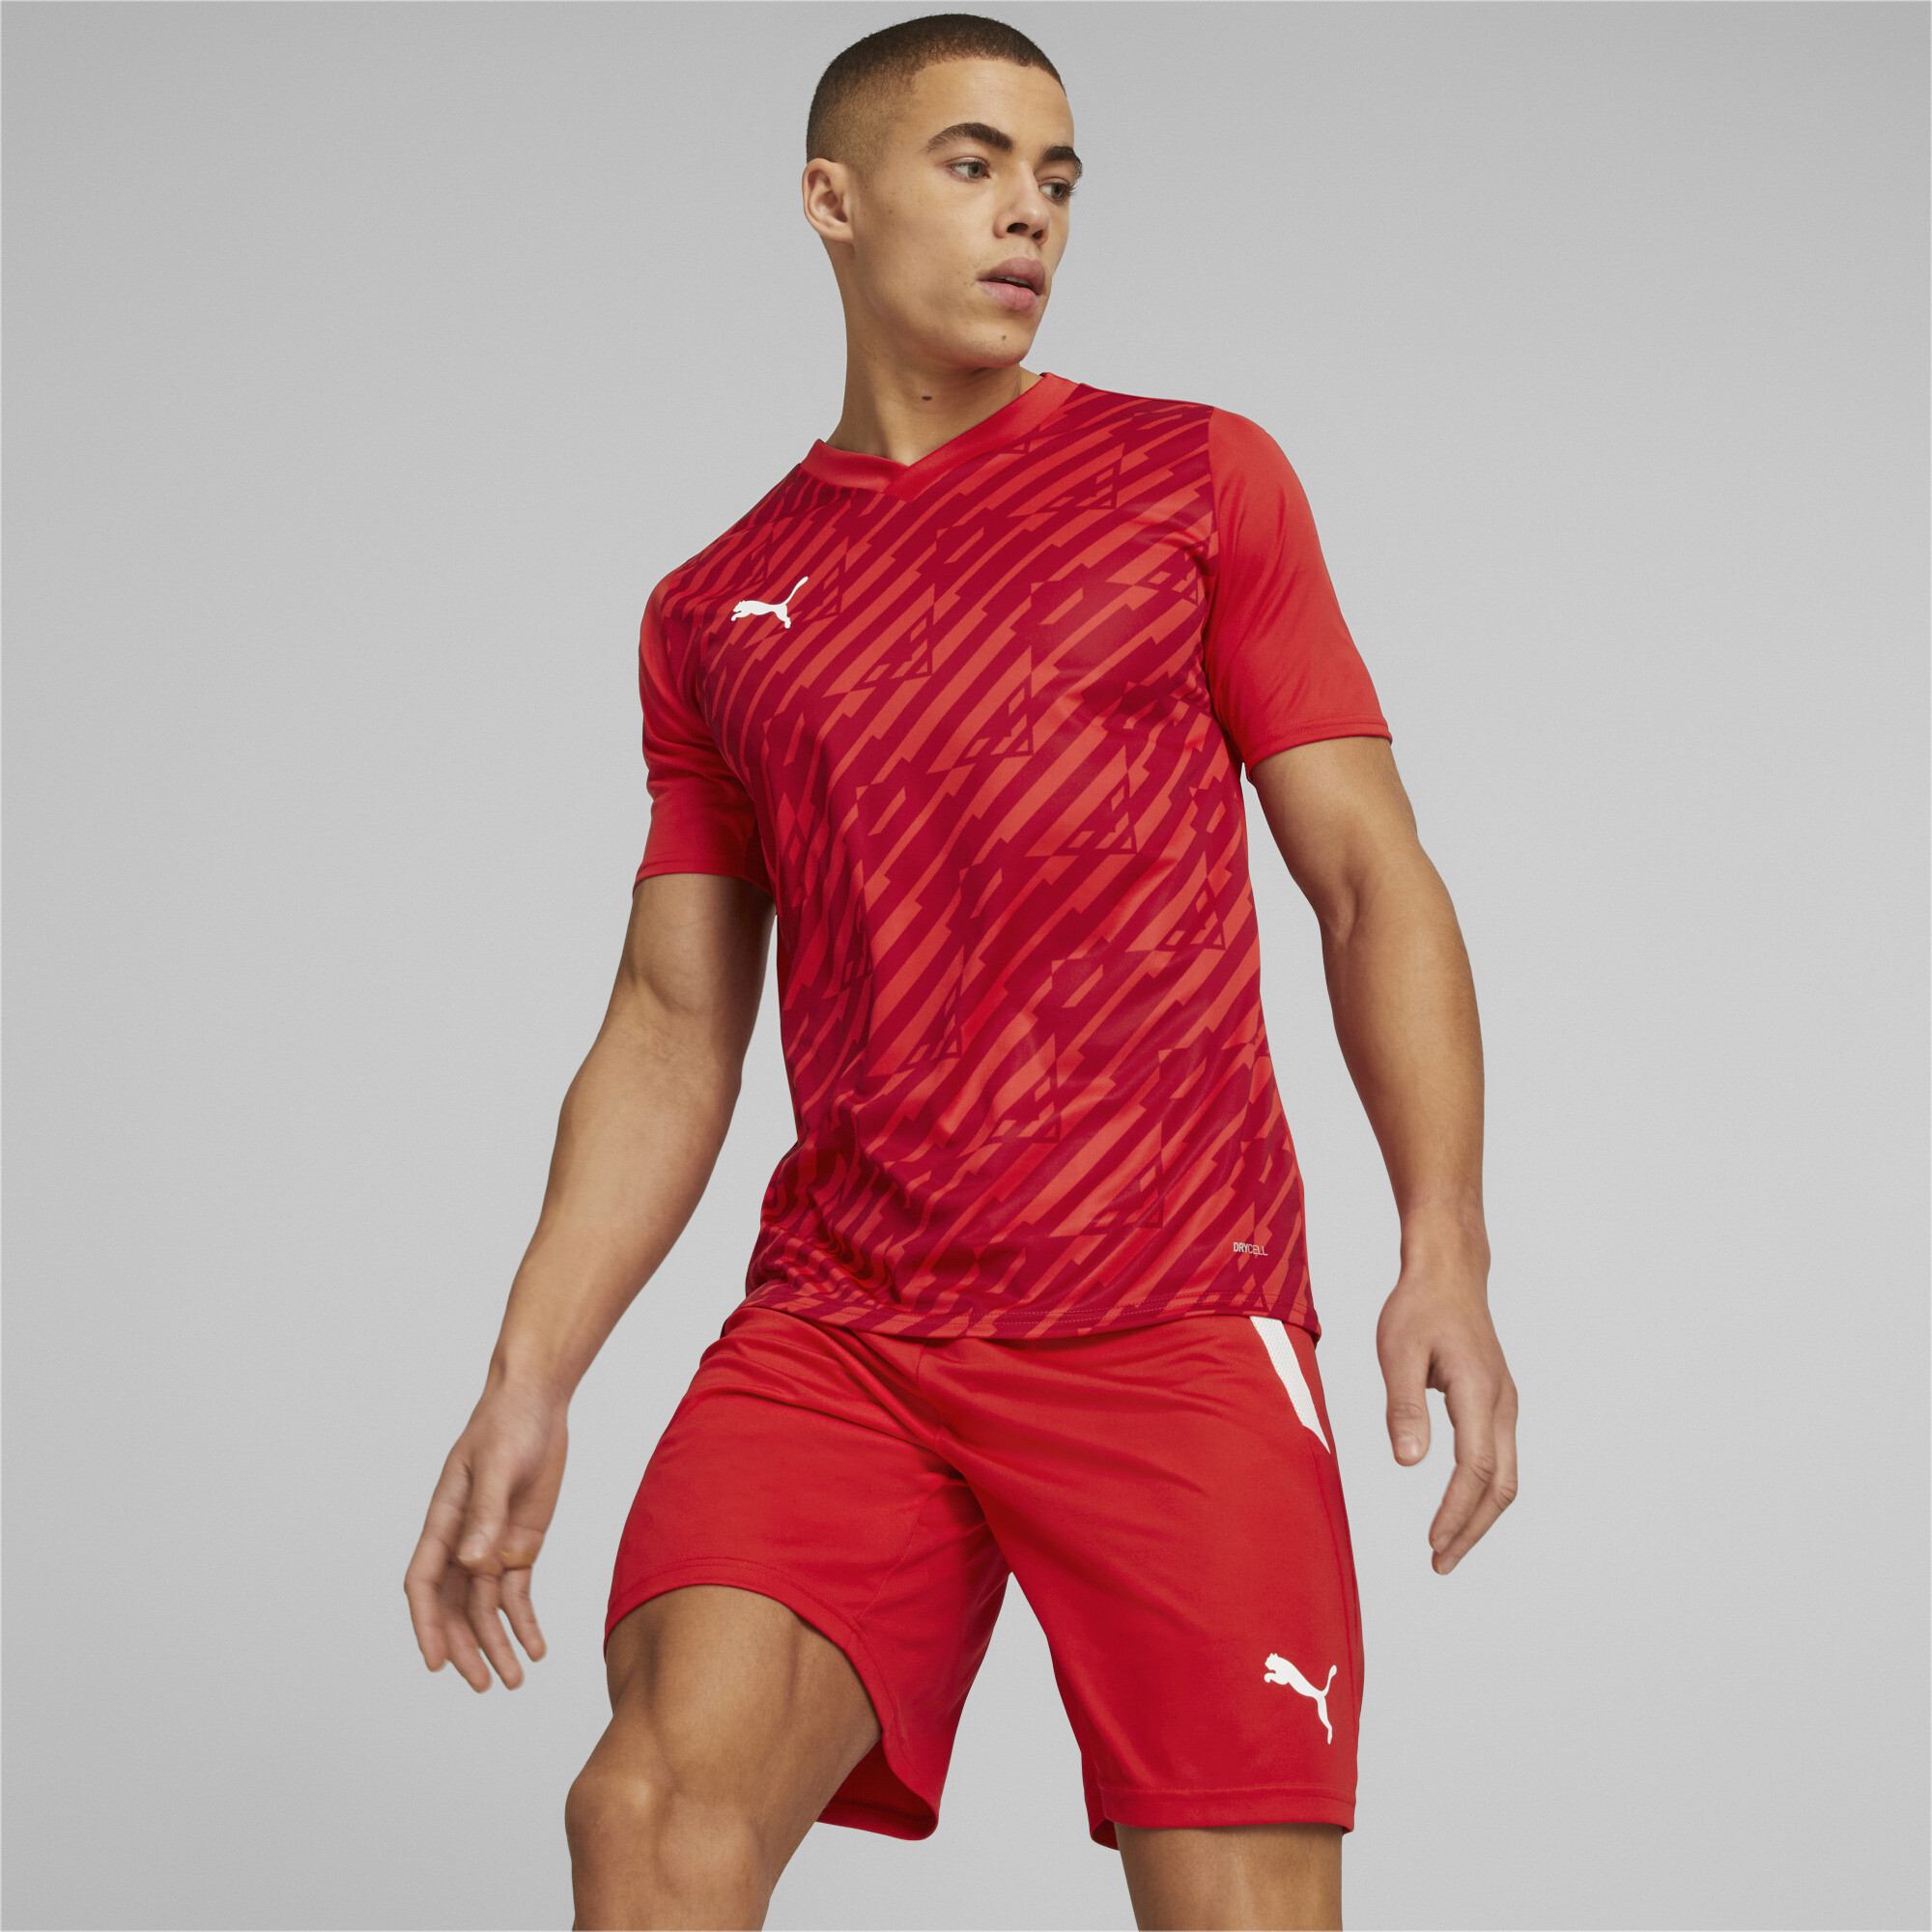 Men's Puma Team ULTIMATE Football Jersey, Red, Size S, Sport